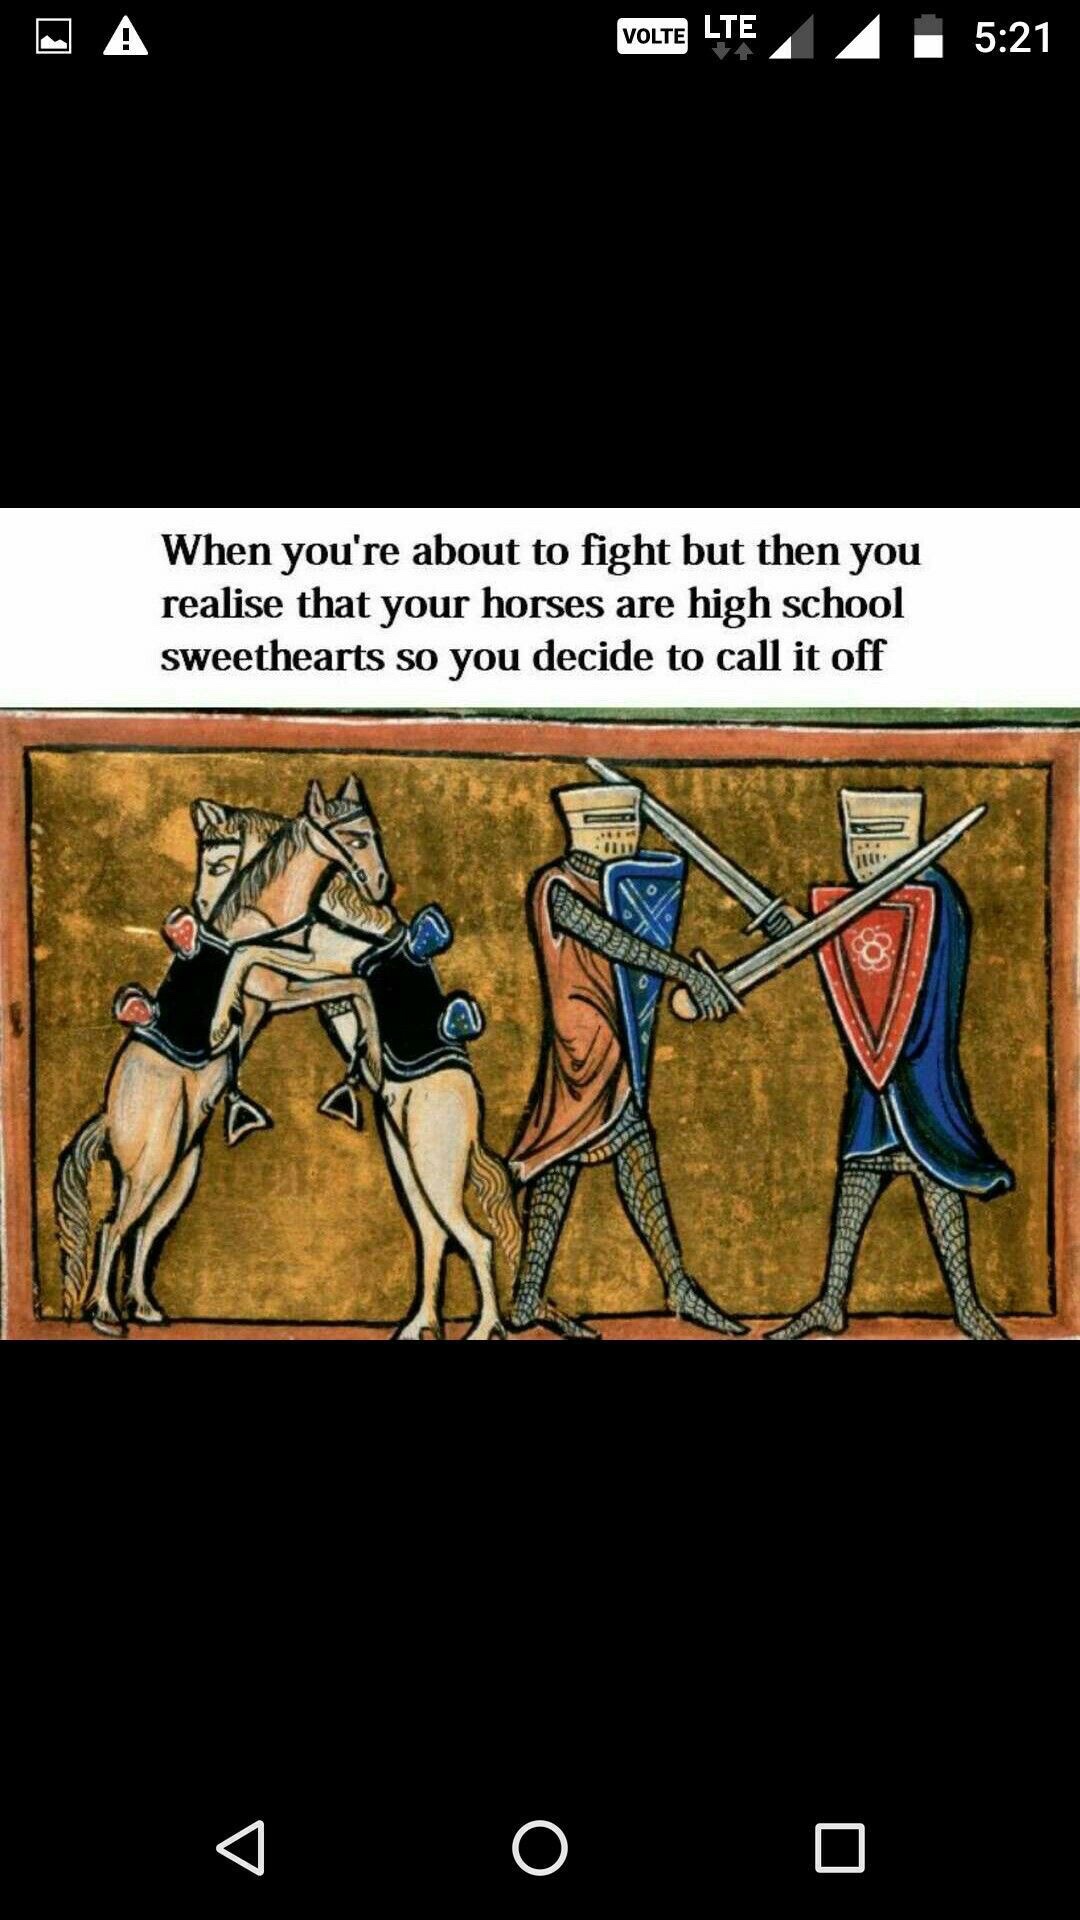 meme medieval horses - Volte Lte When you're about to fight but then you realise that your horses are high school sweethearts so you decide to call it off